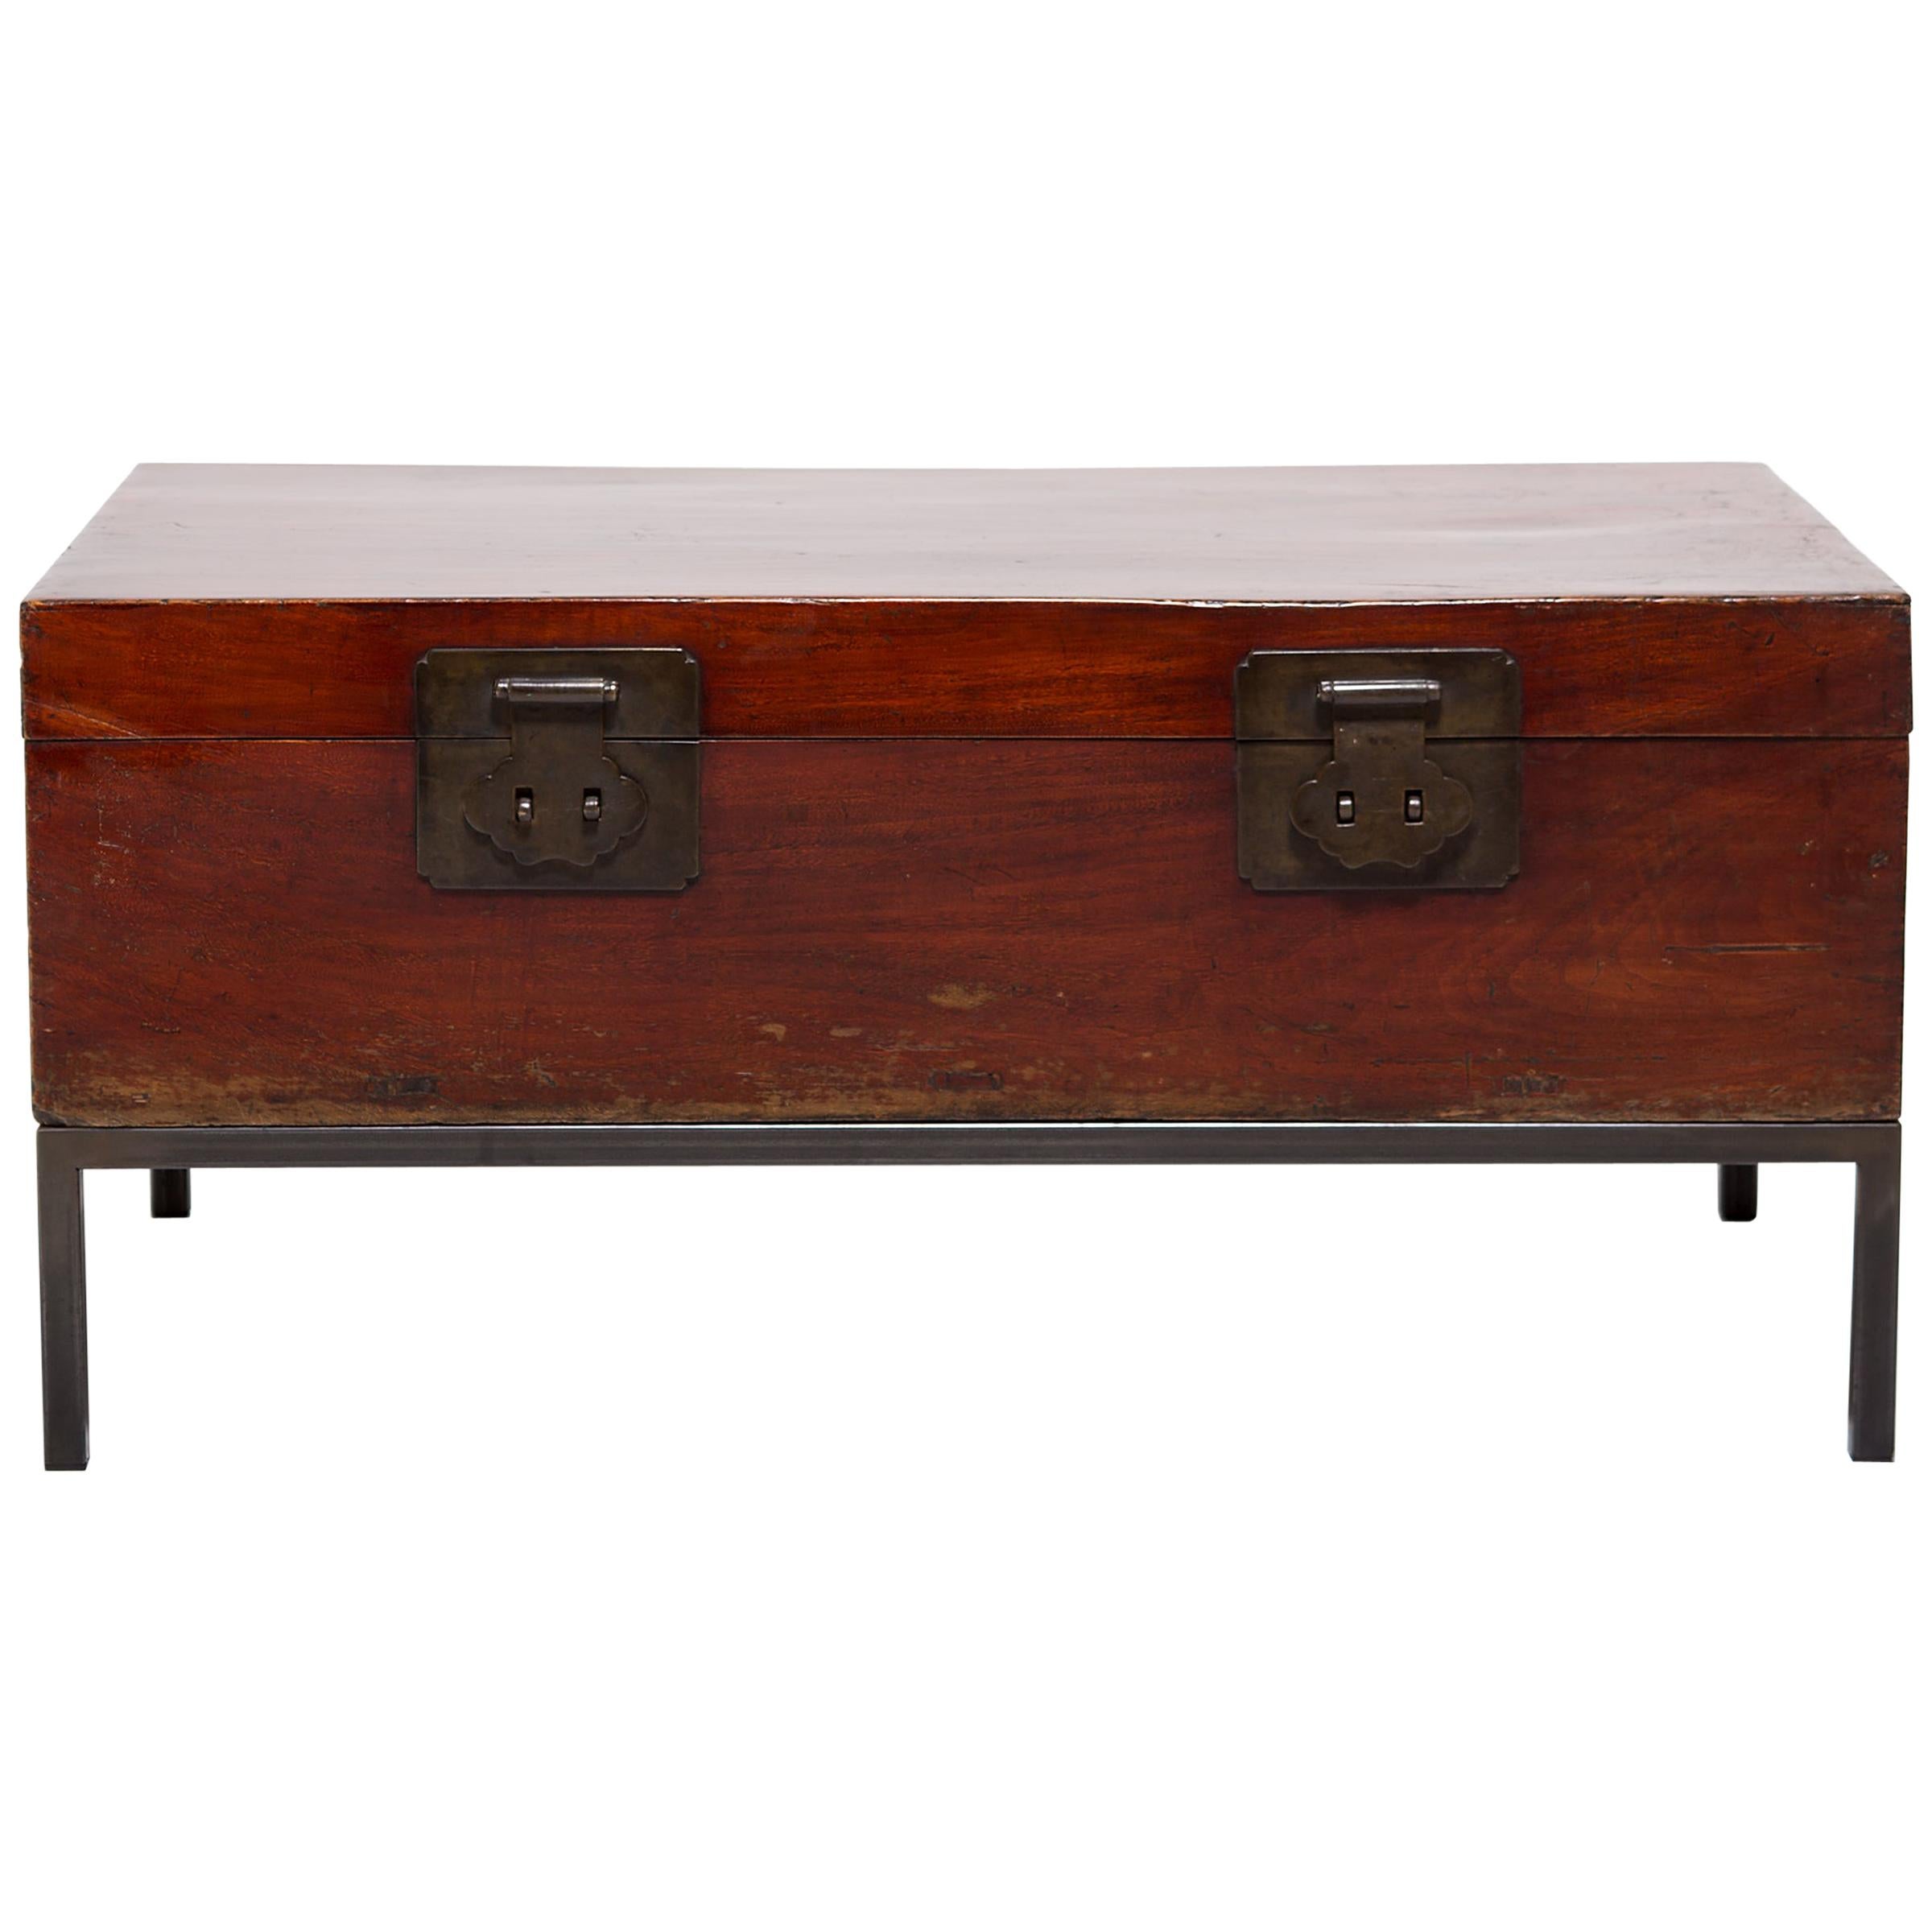 Early 20th Century Chinese Twin Attendants Trunk Table